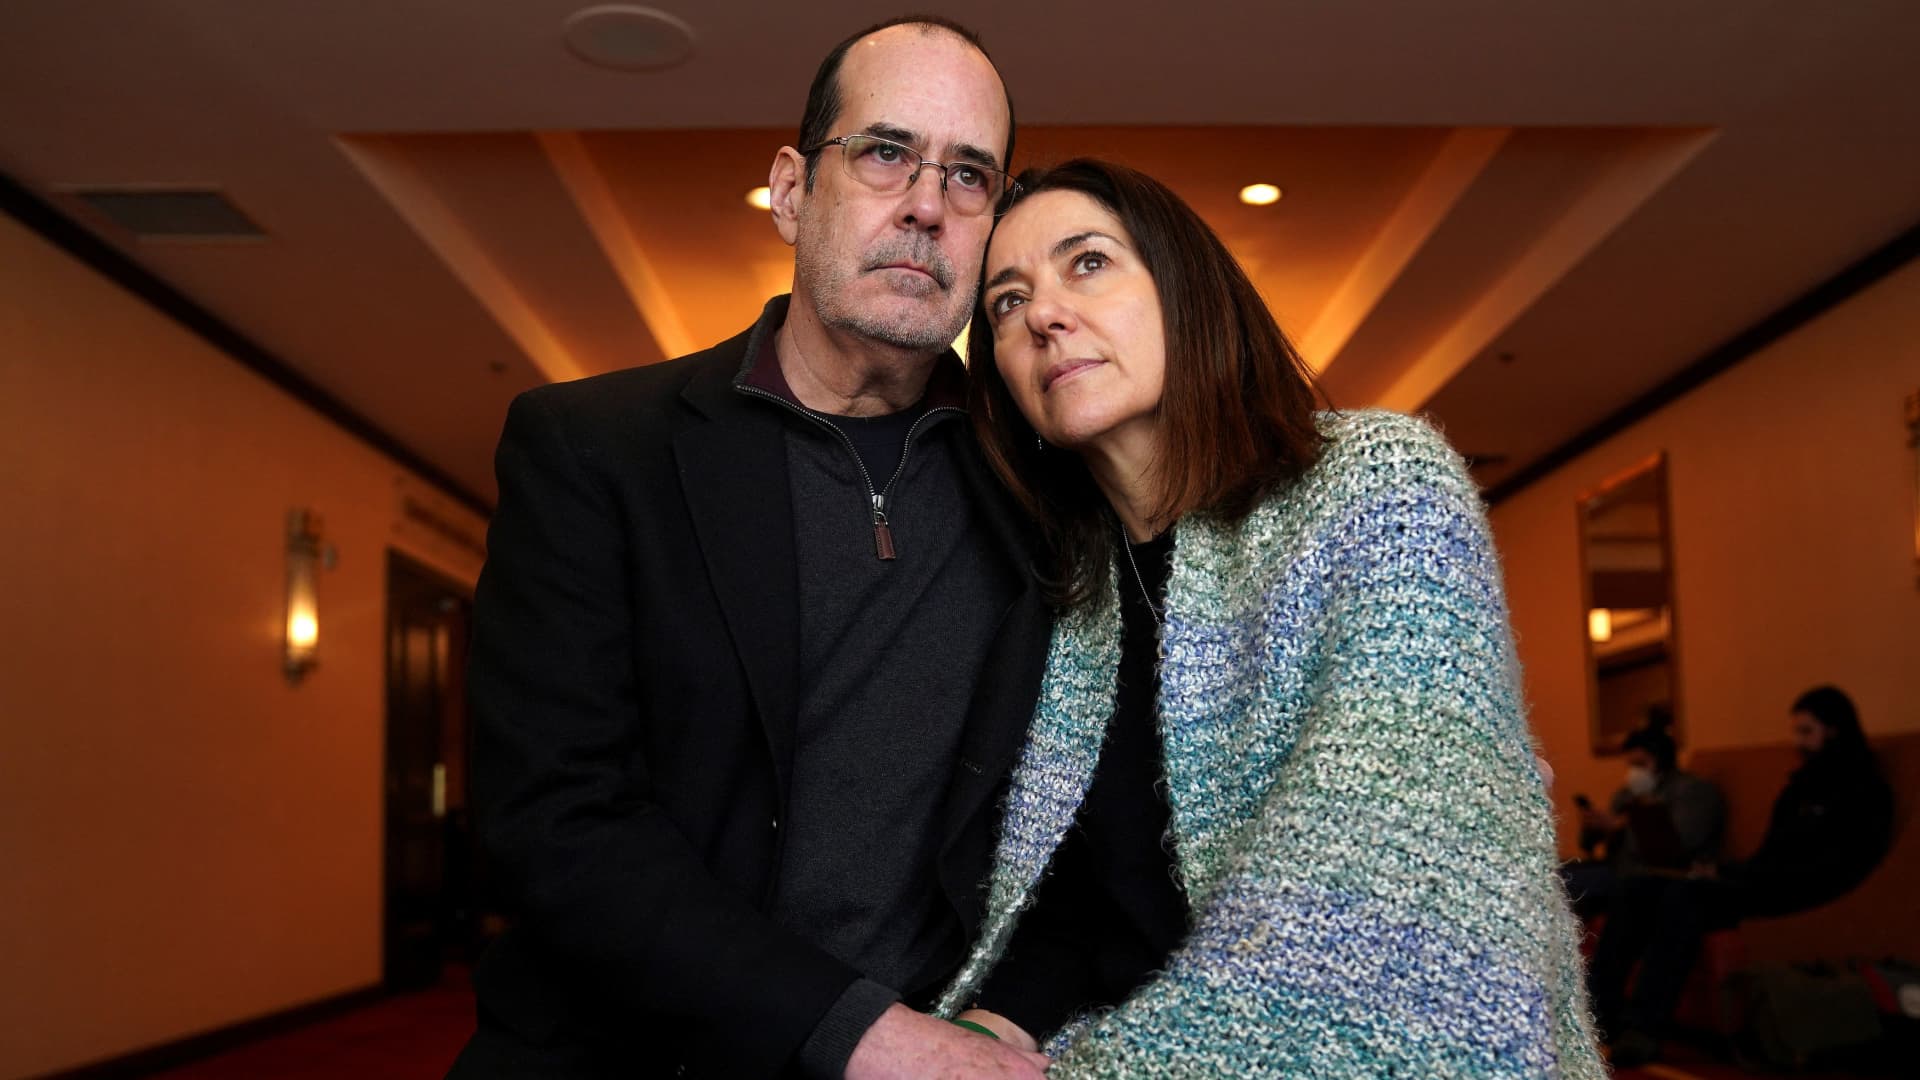 David and Francine Wheeler, parents of Benjamin Wheeler, a Sandy Hook Elementary School shooting victim, pose for a portrait following a press conference to announce a settlement with Remington Arms in Trumbull, Connecticut, U.S., February 15, 2022.